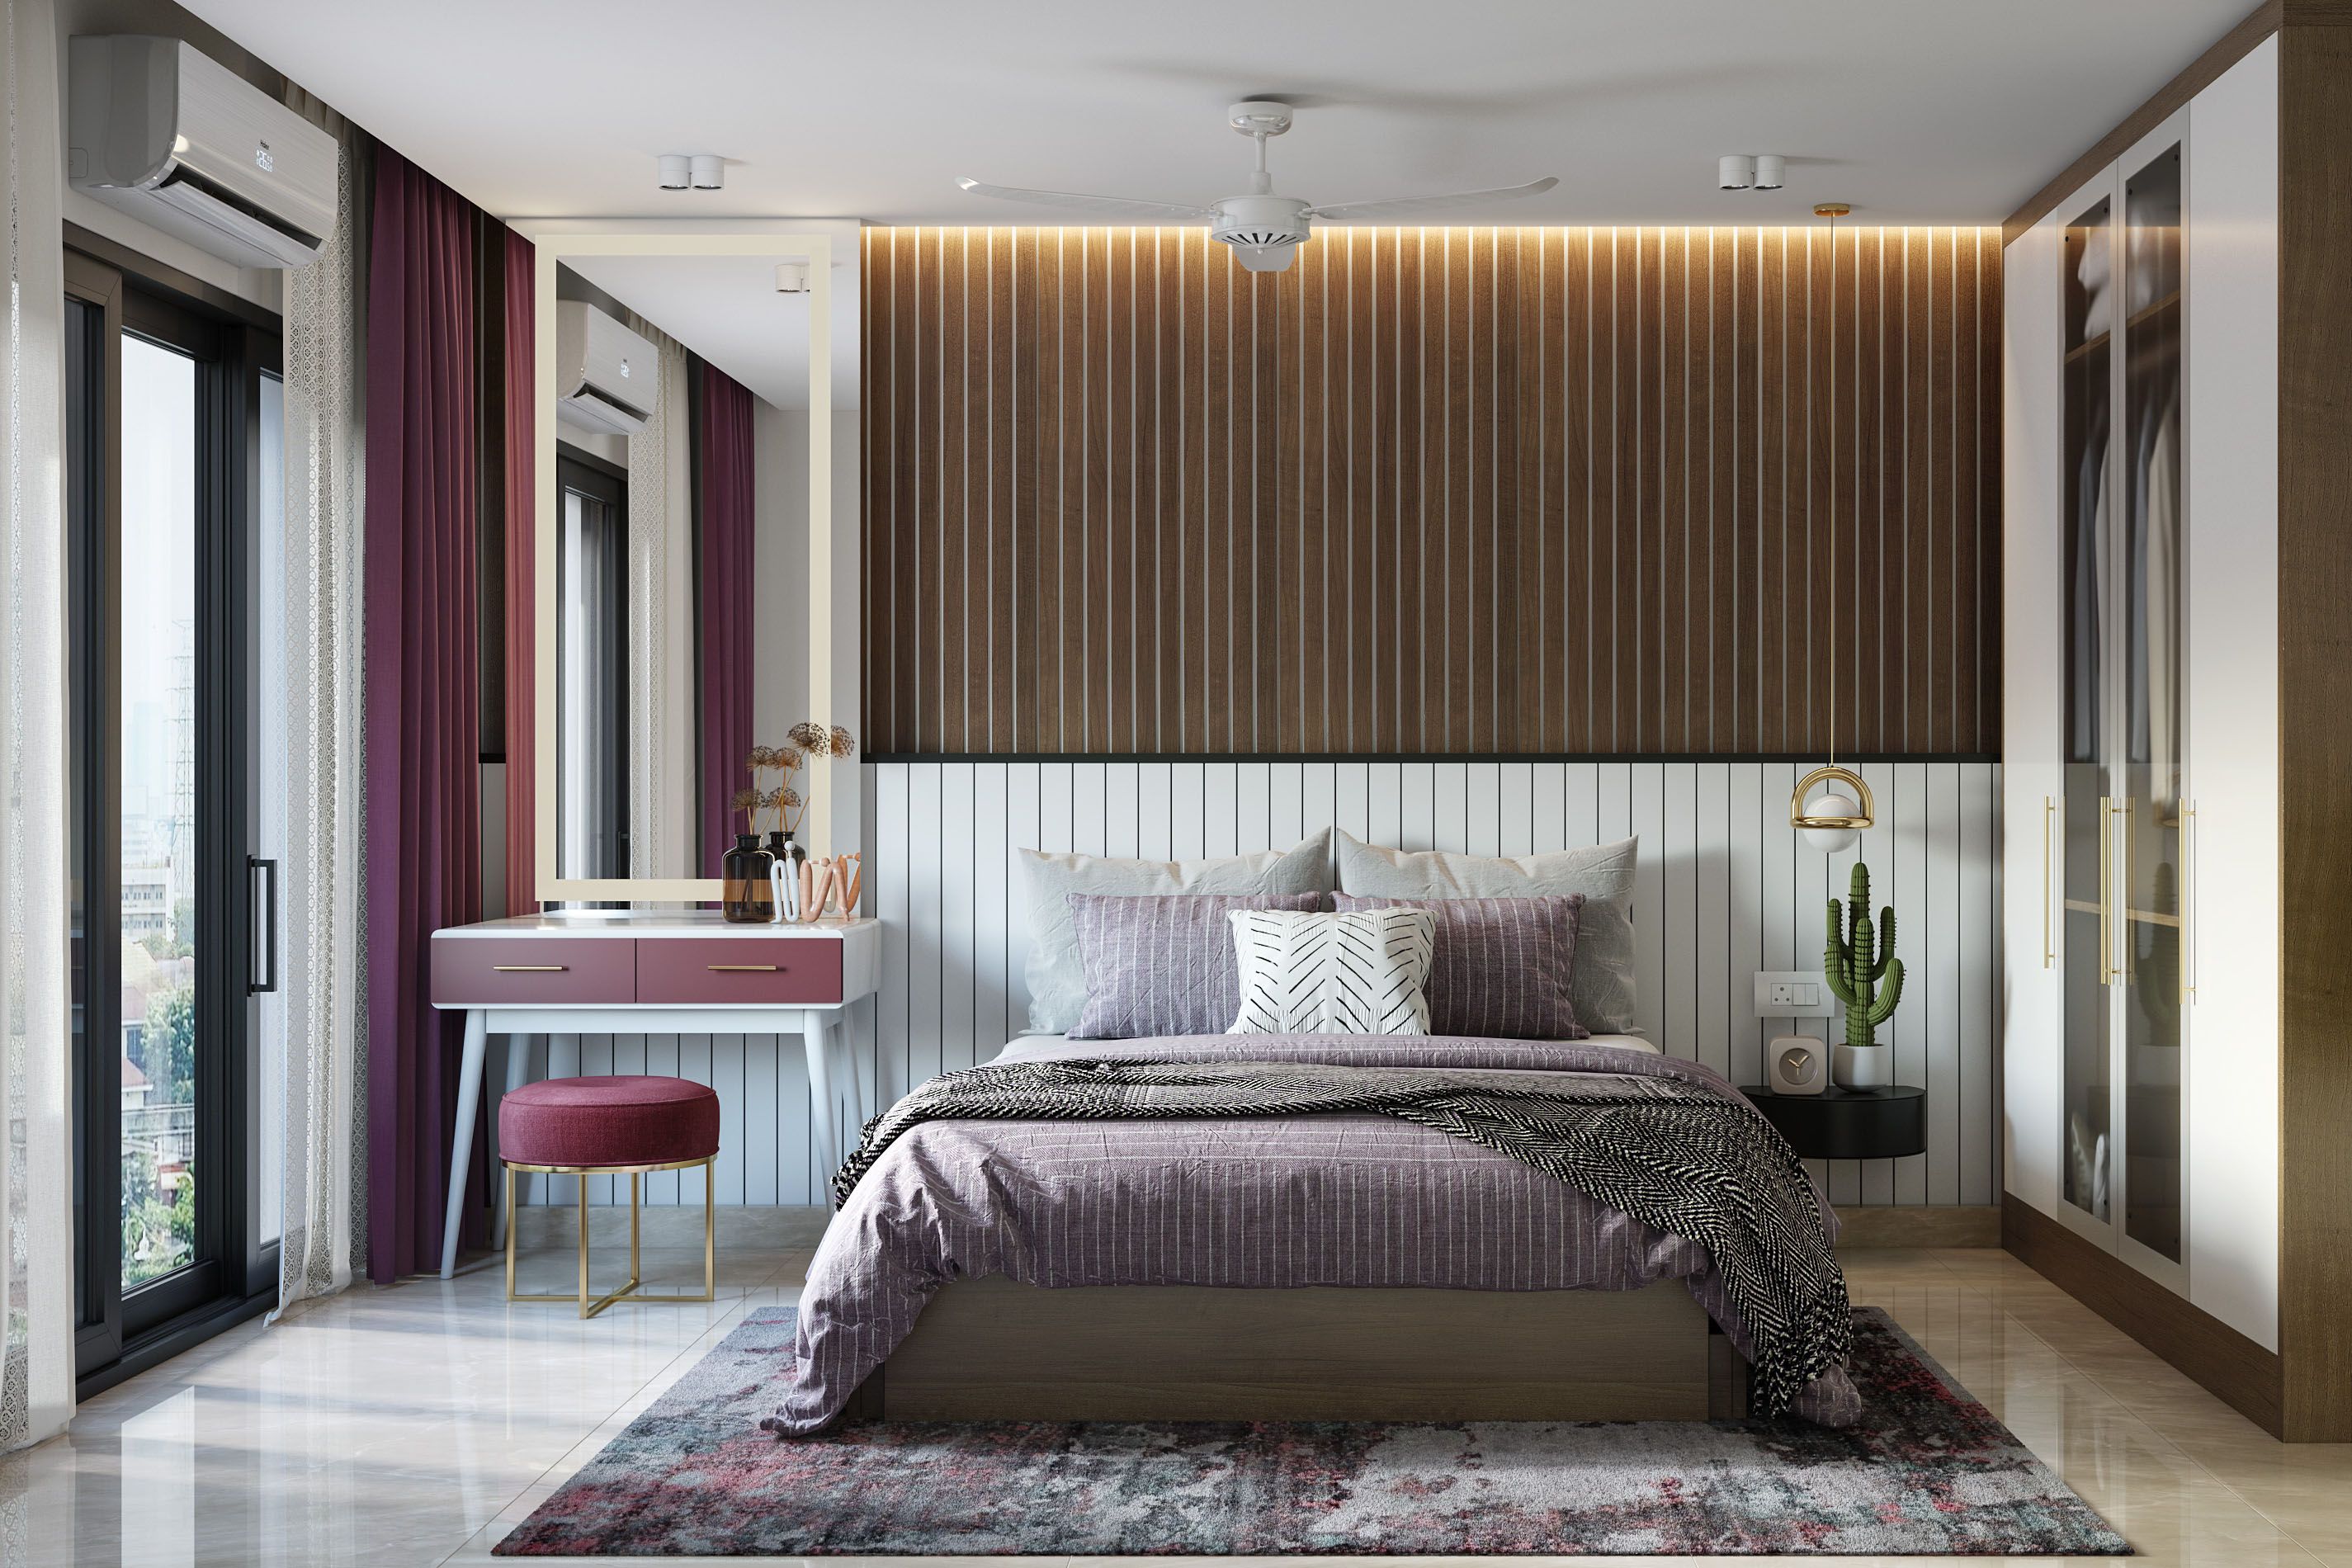 Modern Bedroom Design With Dual-Toned Striped Wall Panelling